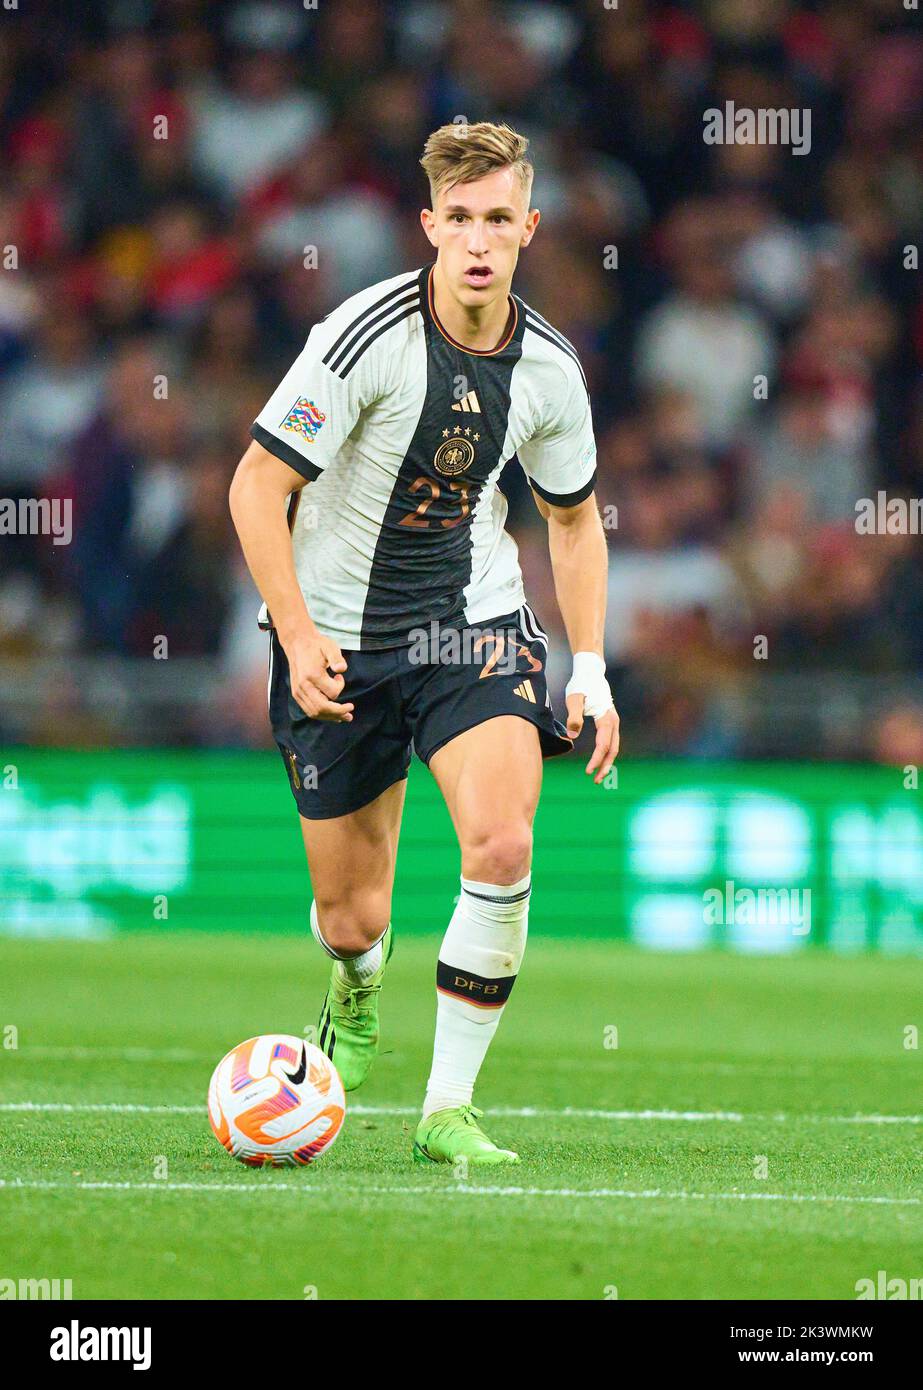 Nico Schlotterbeck, DFB 23  in the UEFA Nations League 2022 match  ENGLAND - GERMANY 3-3  in Season 2022/2023 on Sept 26, 2022  in London, Great Britain.  © Peter Schatz / Alamy Live News Stock Photo